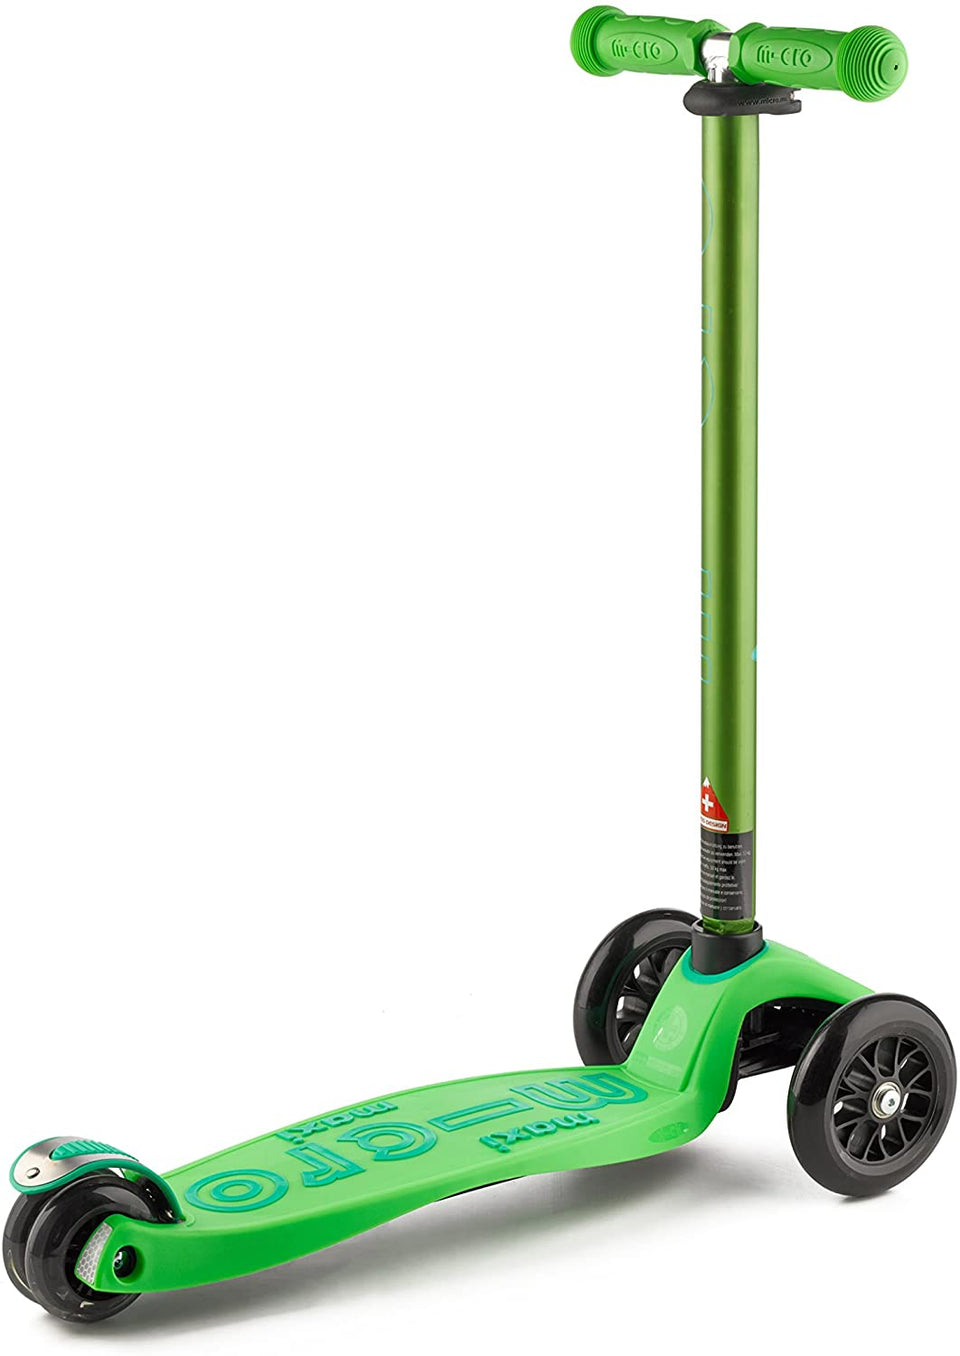 hugge kilometer At vise Maxi Micro Deluxe Green Scooter – Rock Paper Scissors Toy Store Duxbury